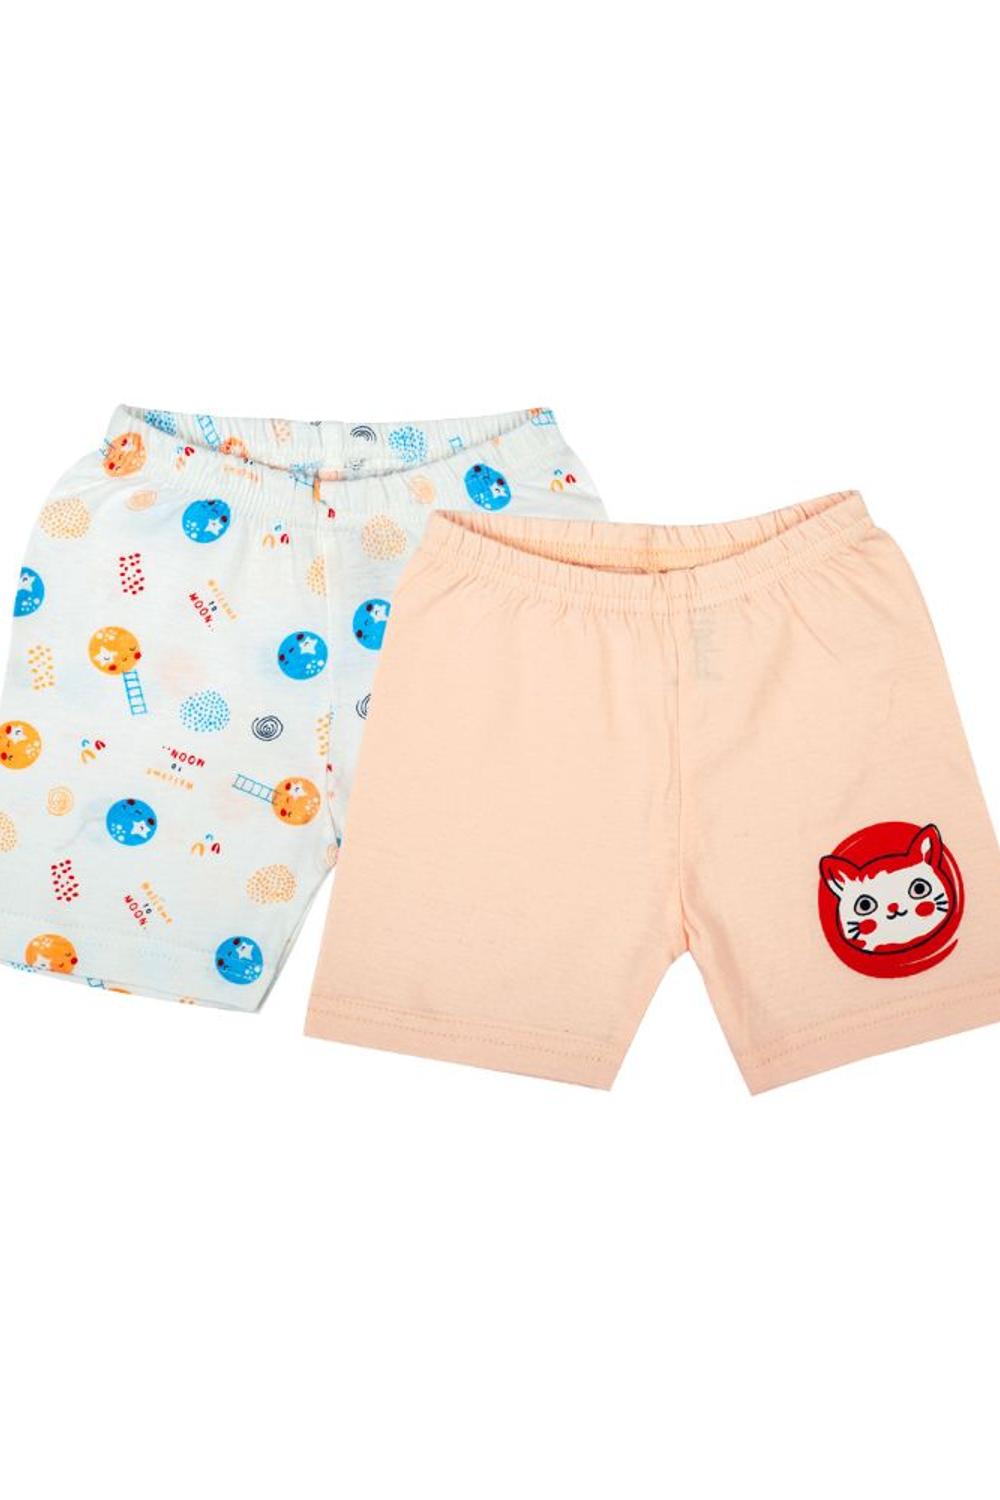 Mee Mee Shorts Pack Of 2 - Peach &Amp White Printed